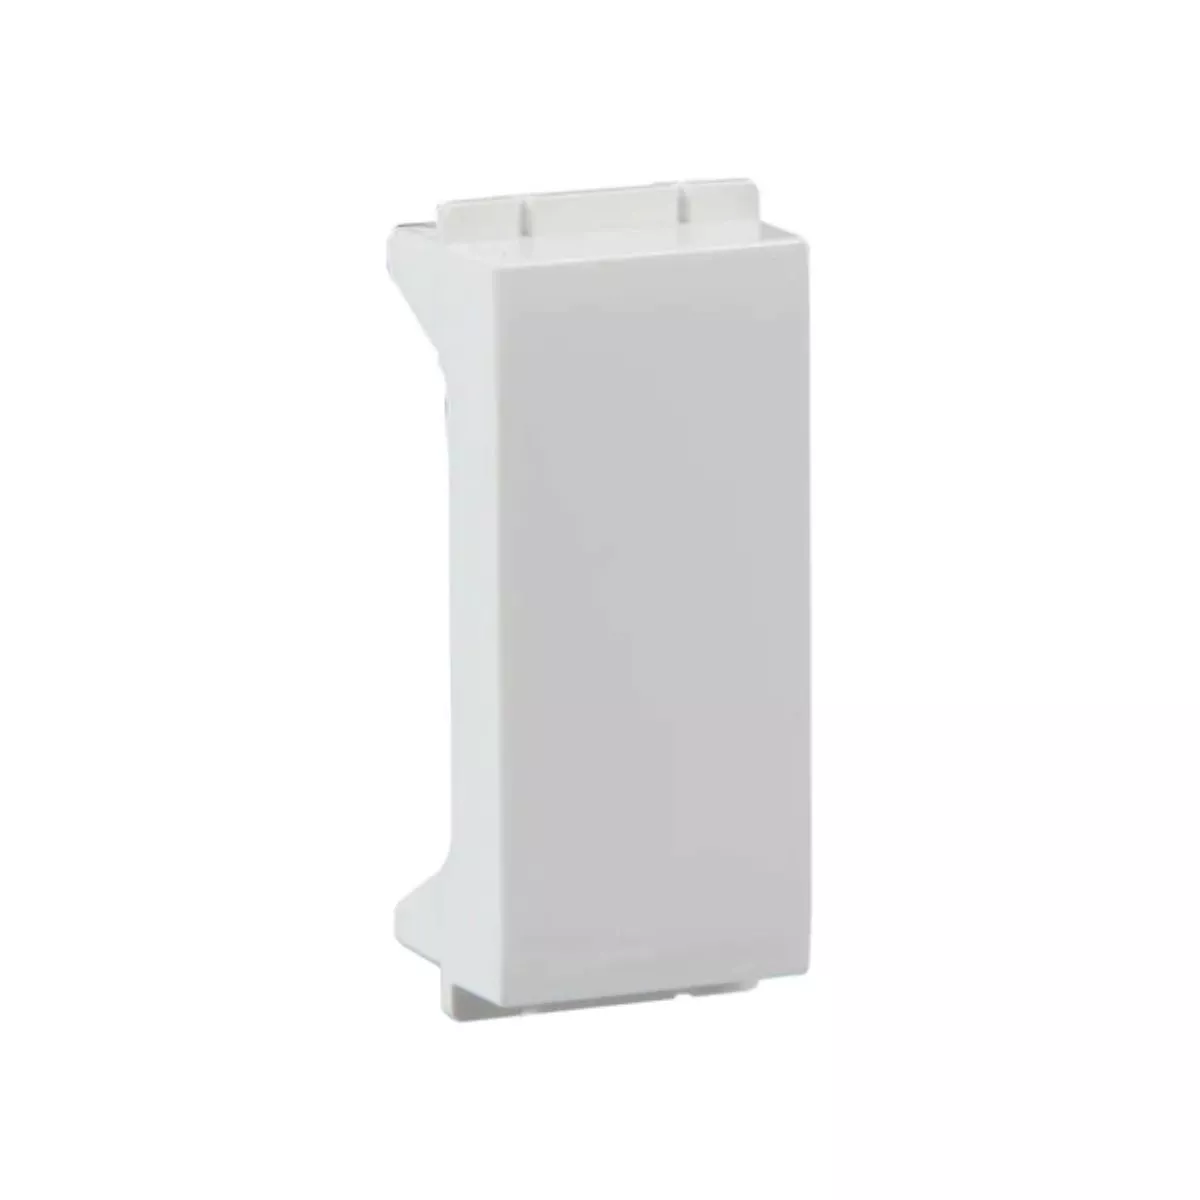 Havells Crabtree Athena Buzzer -2M Support Modules White - ElectricBasket